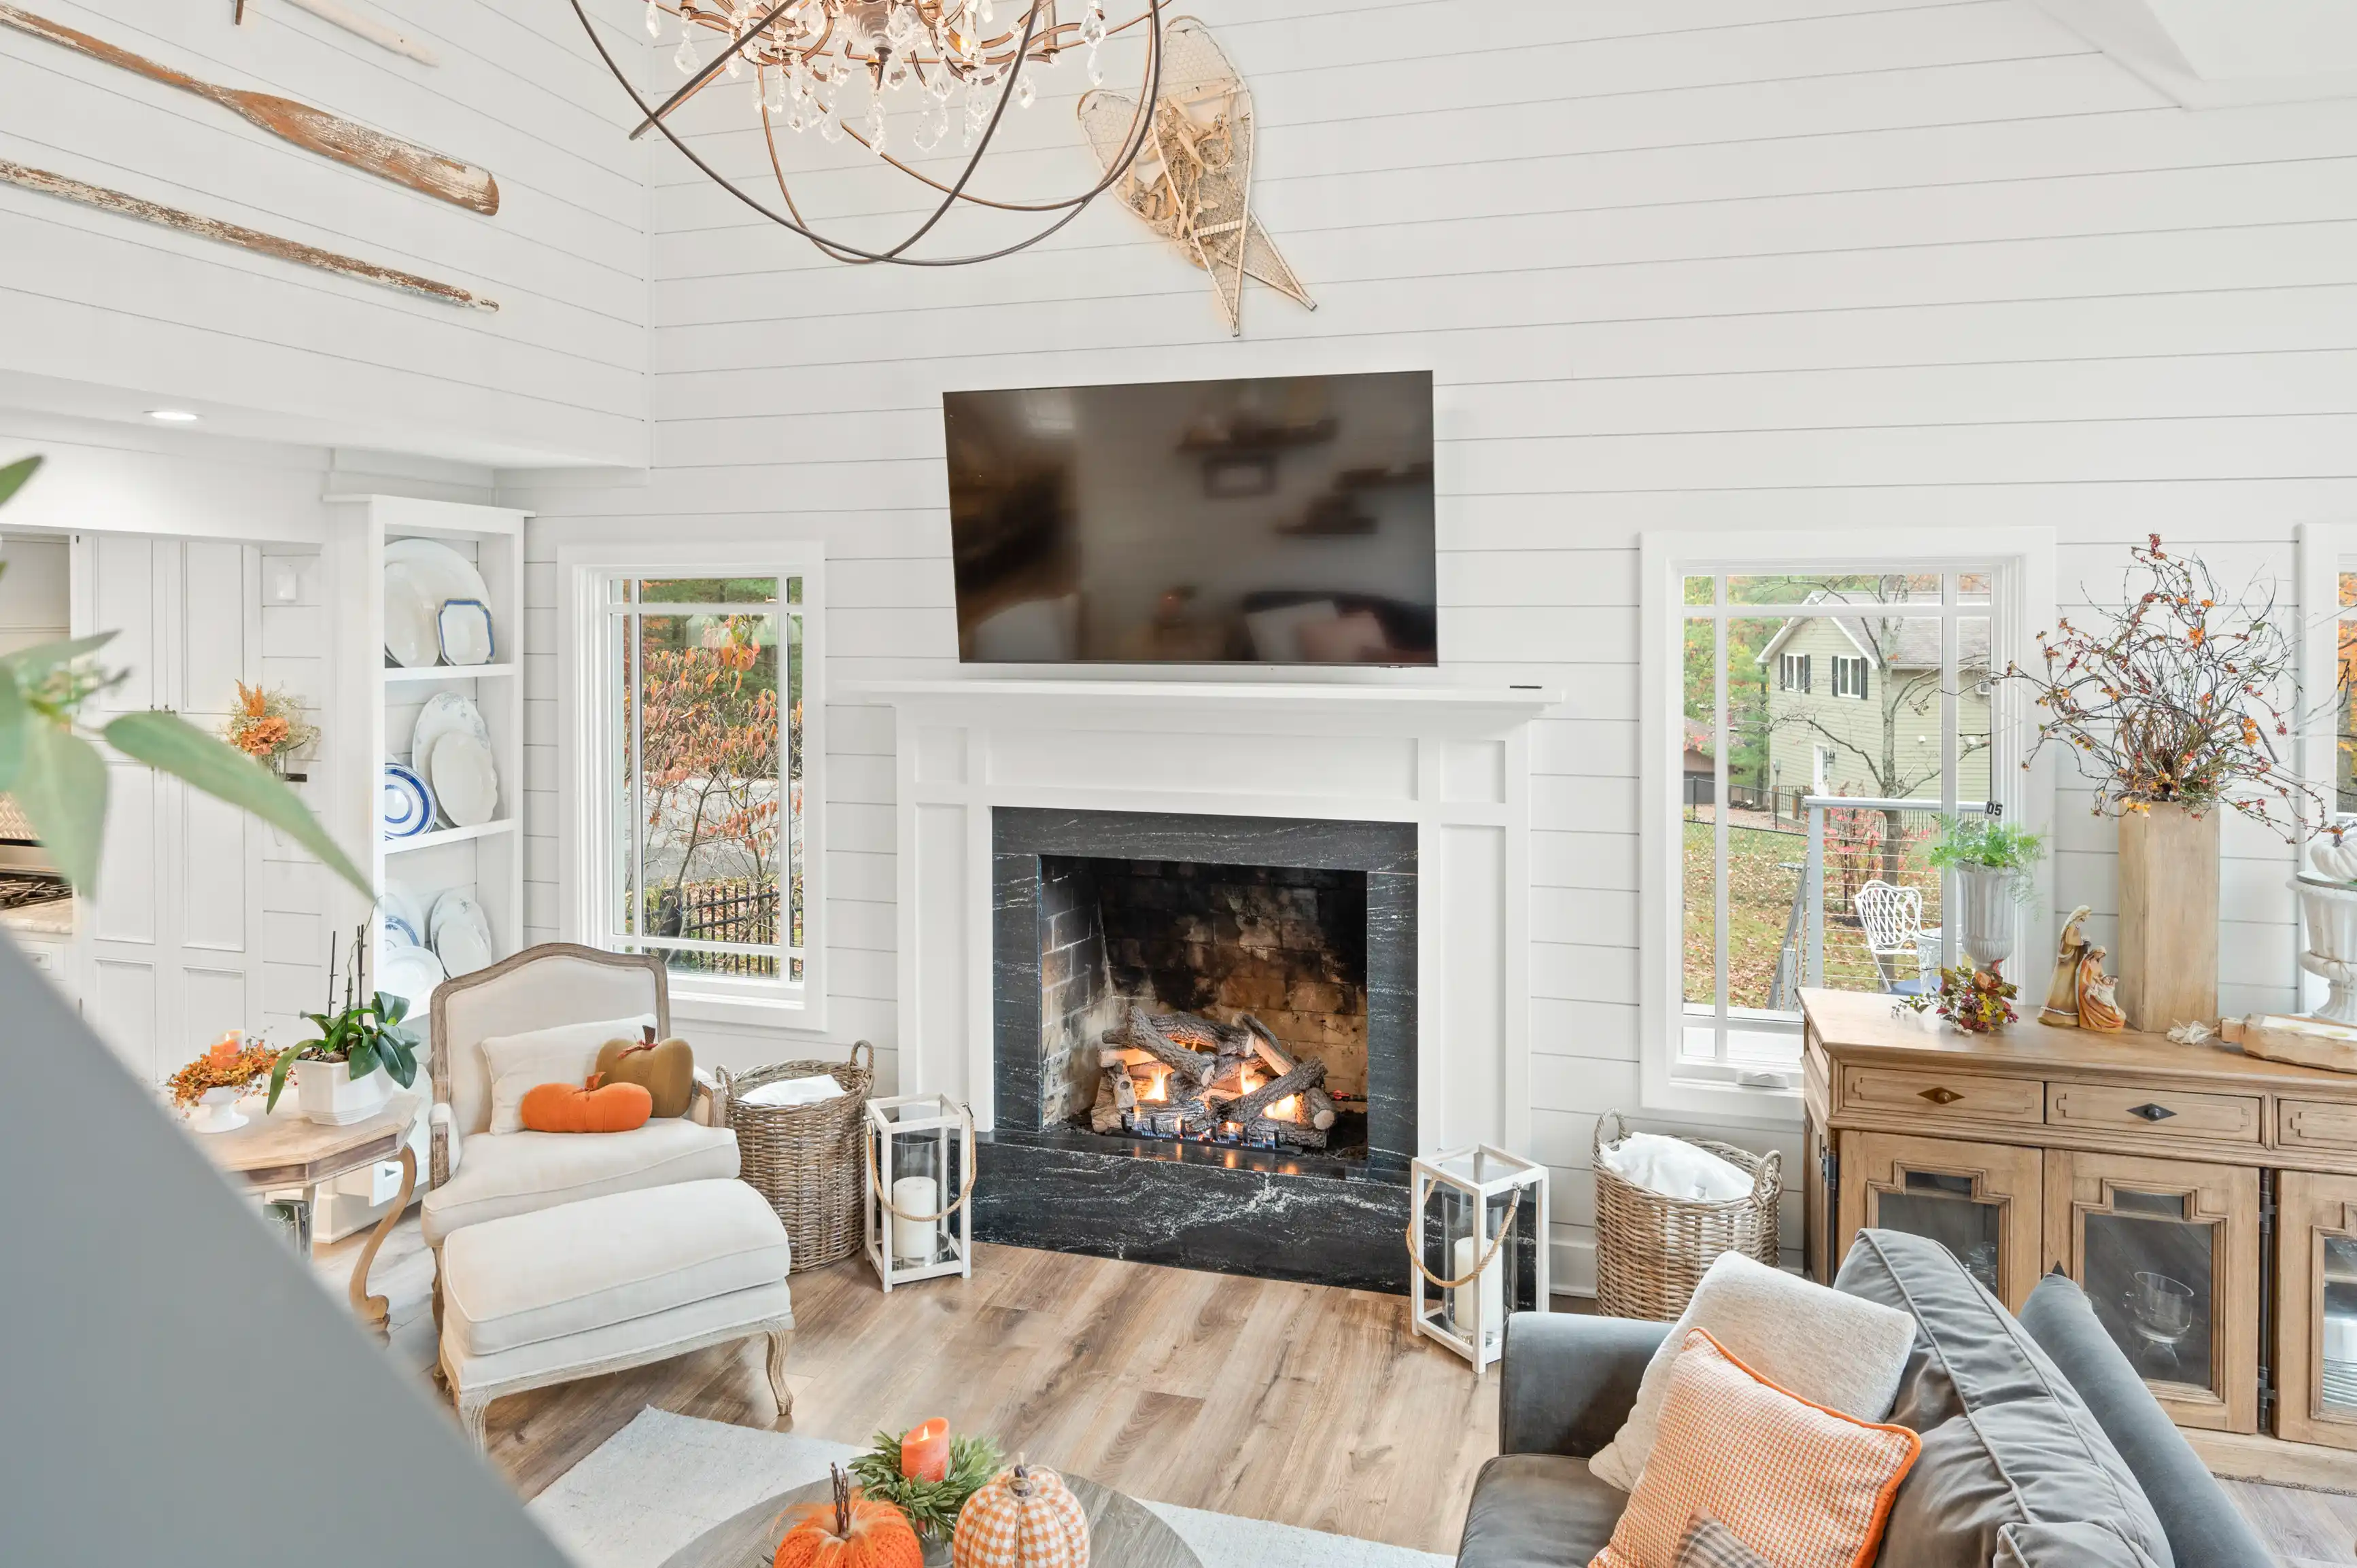 Cozy living room with white shiplap walls, a lit fireplace, autumn decorations, and a chandelier above.